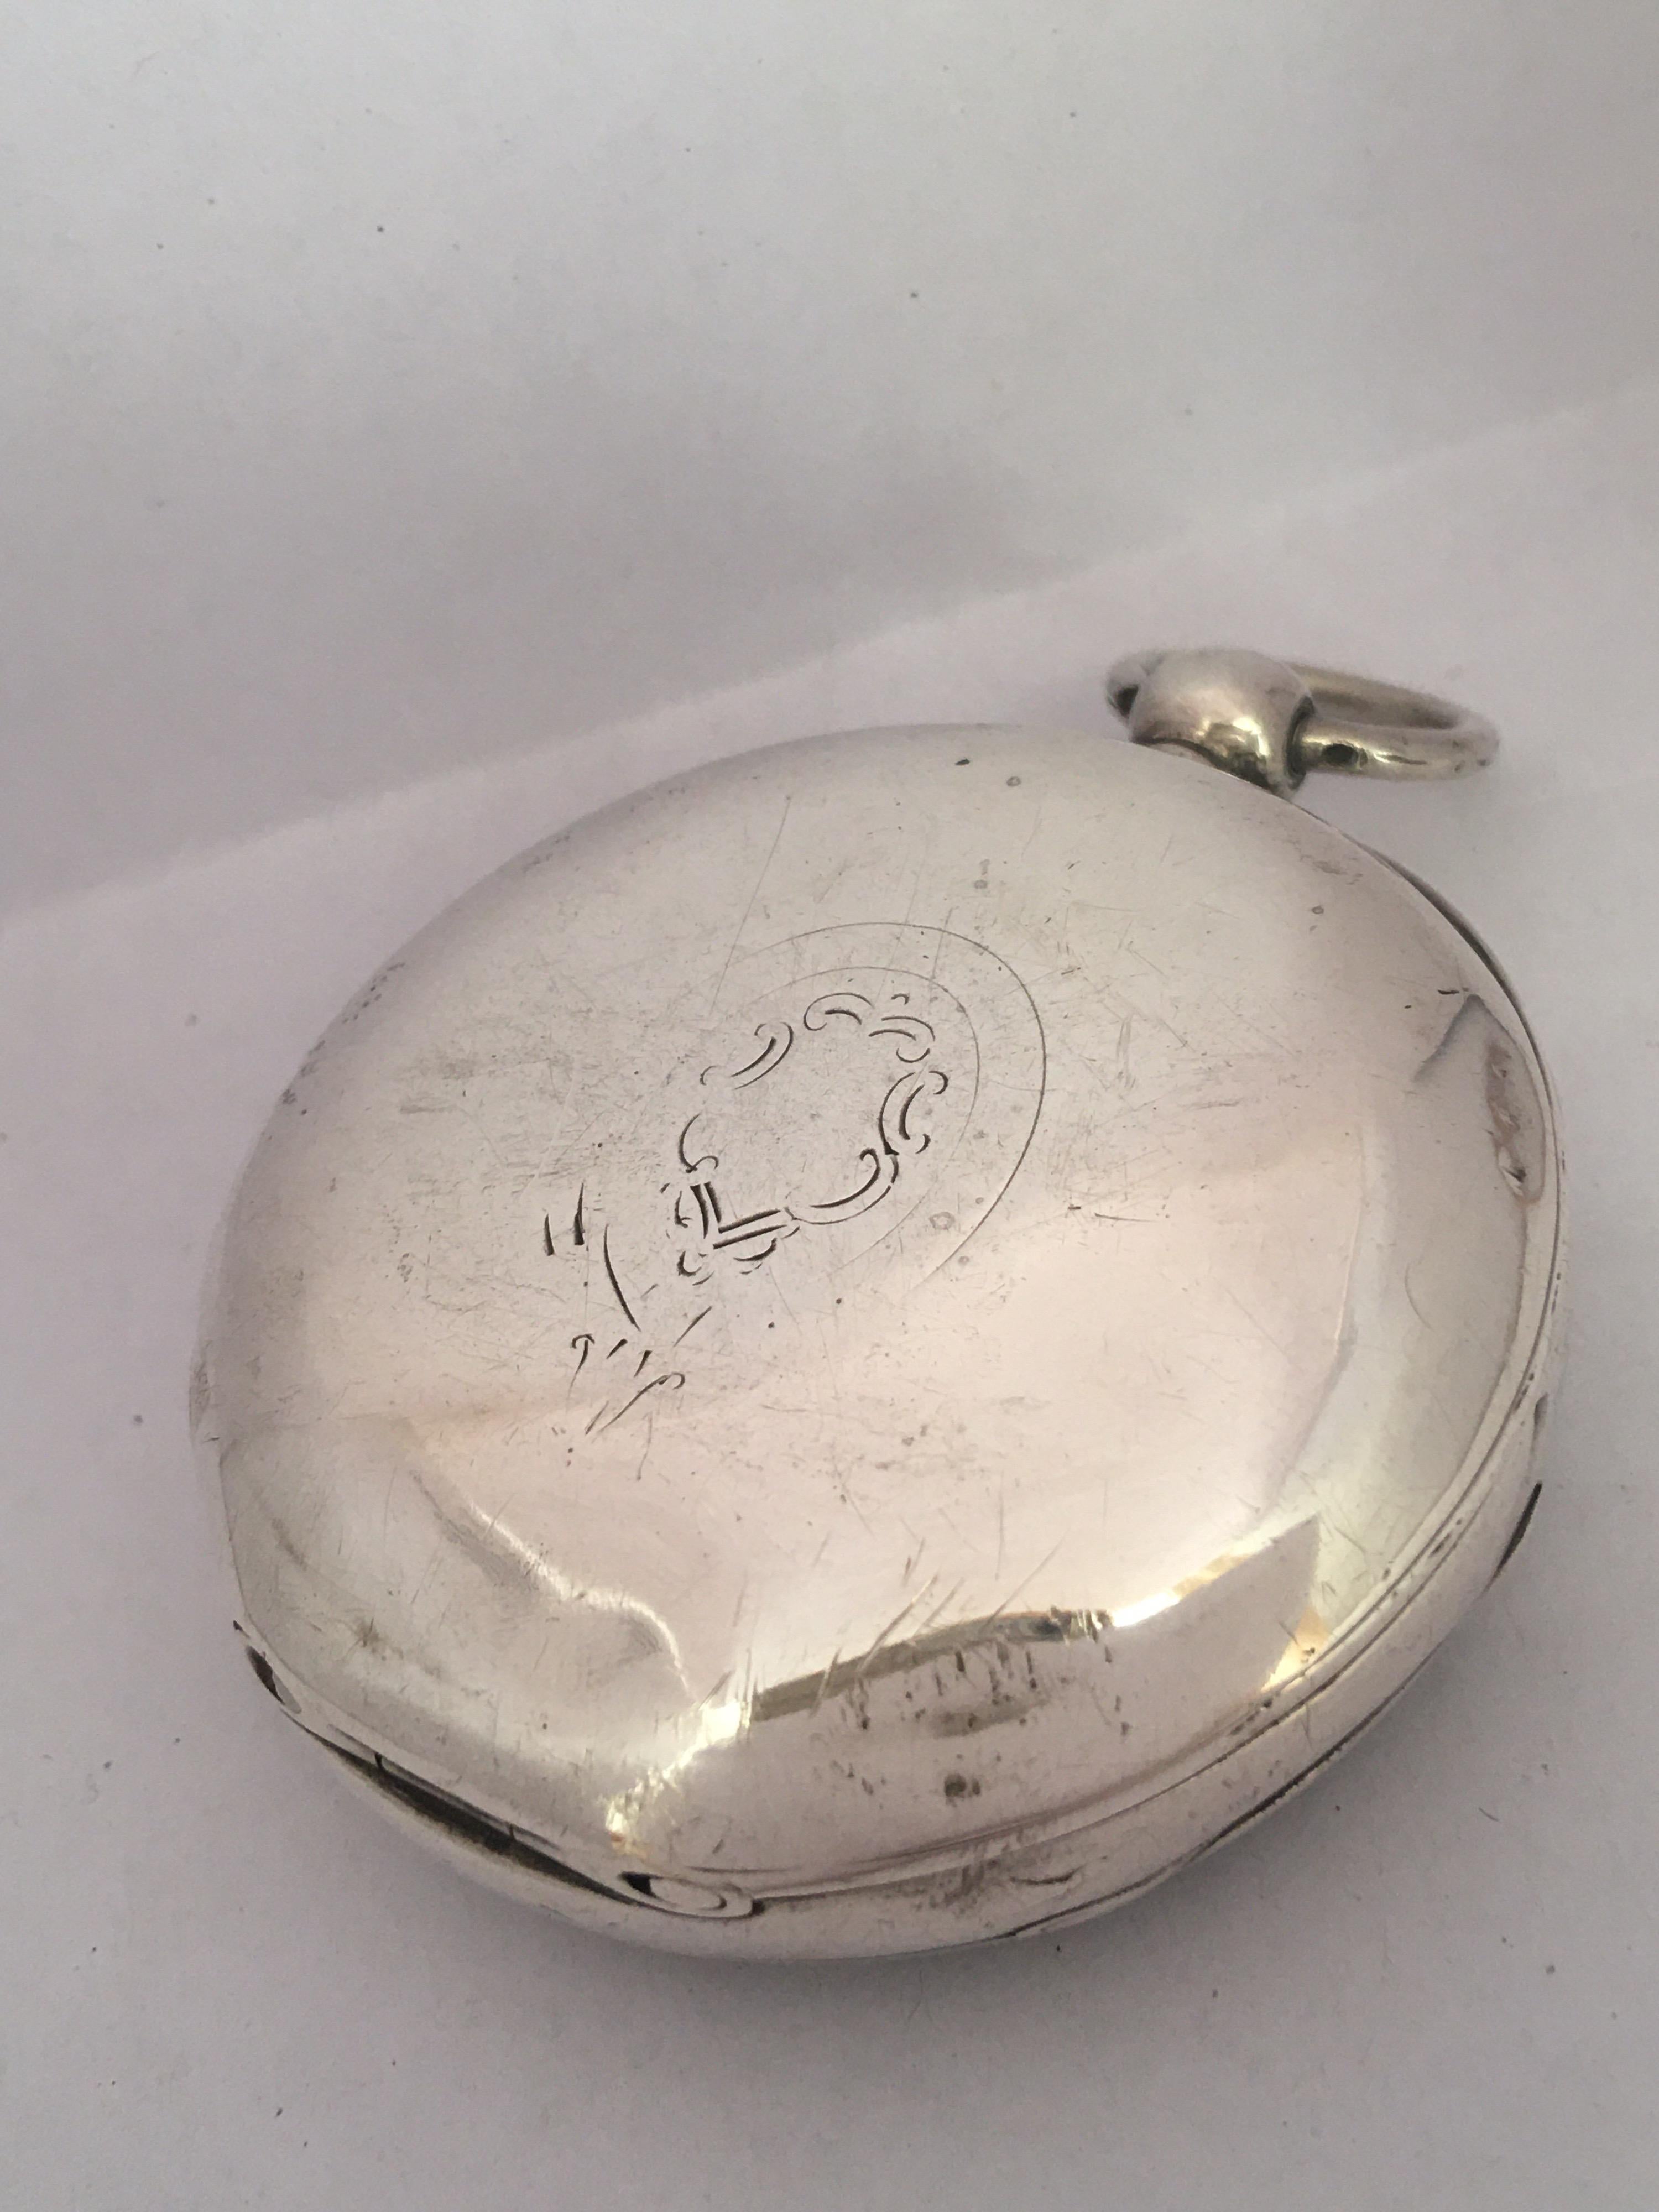 This beautiful antique 57mm diameter key-winding silver pocket watch is in good working order and it is running well. Visible signs of ageing and wear with small light surface marks on the glass and on the watch case as shown. Some dents and bruises